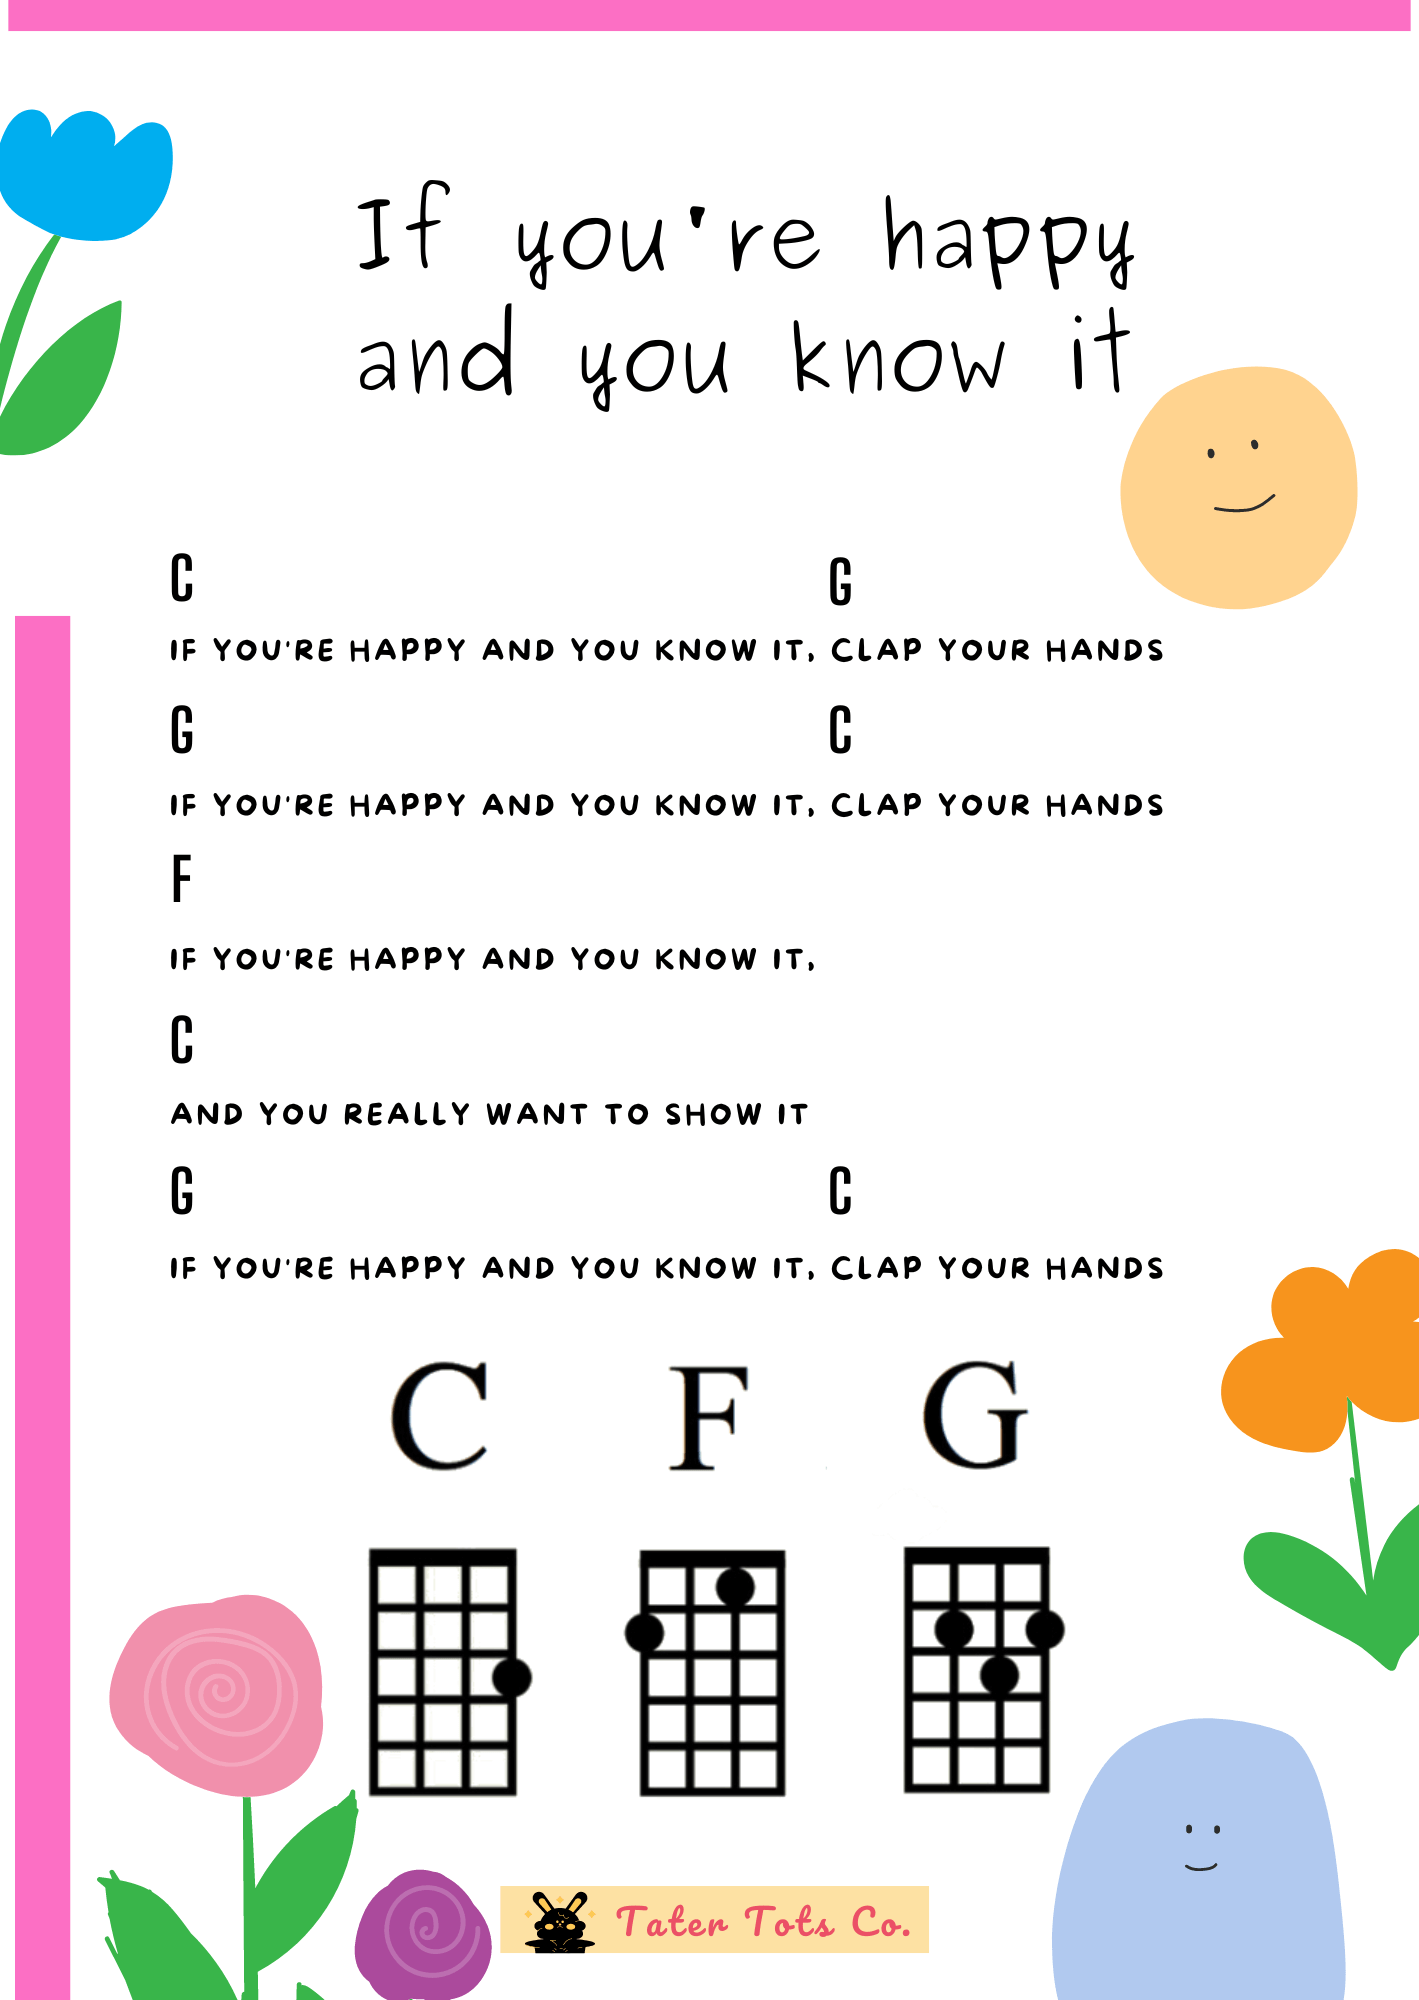 Happy and you know it Ukulele Song printable